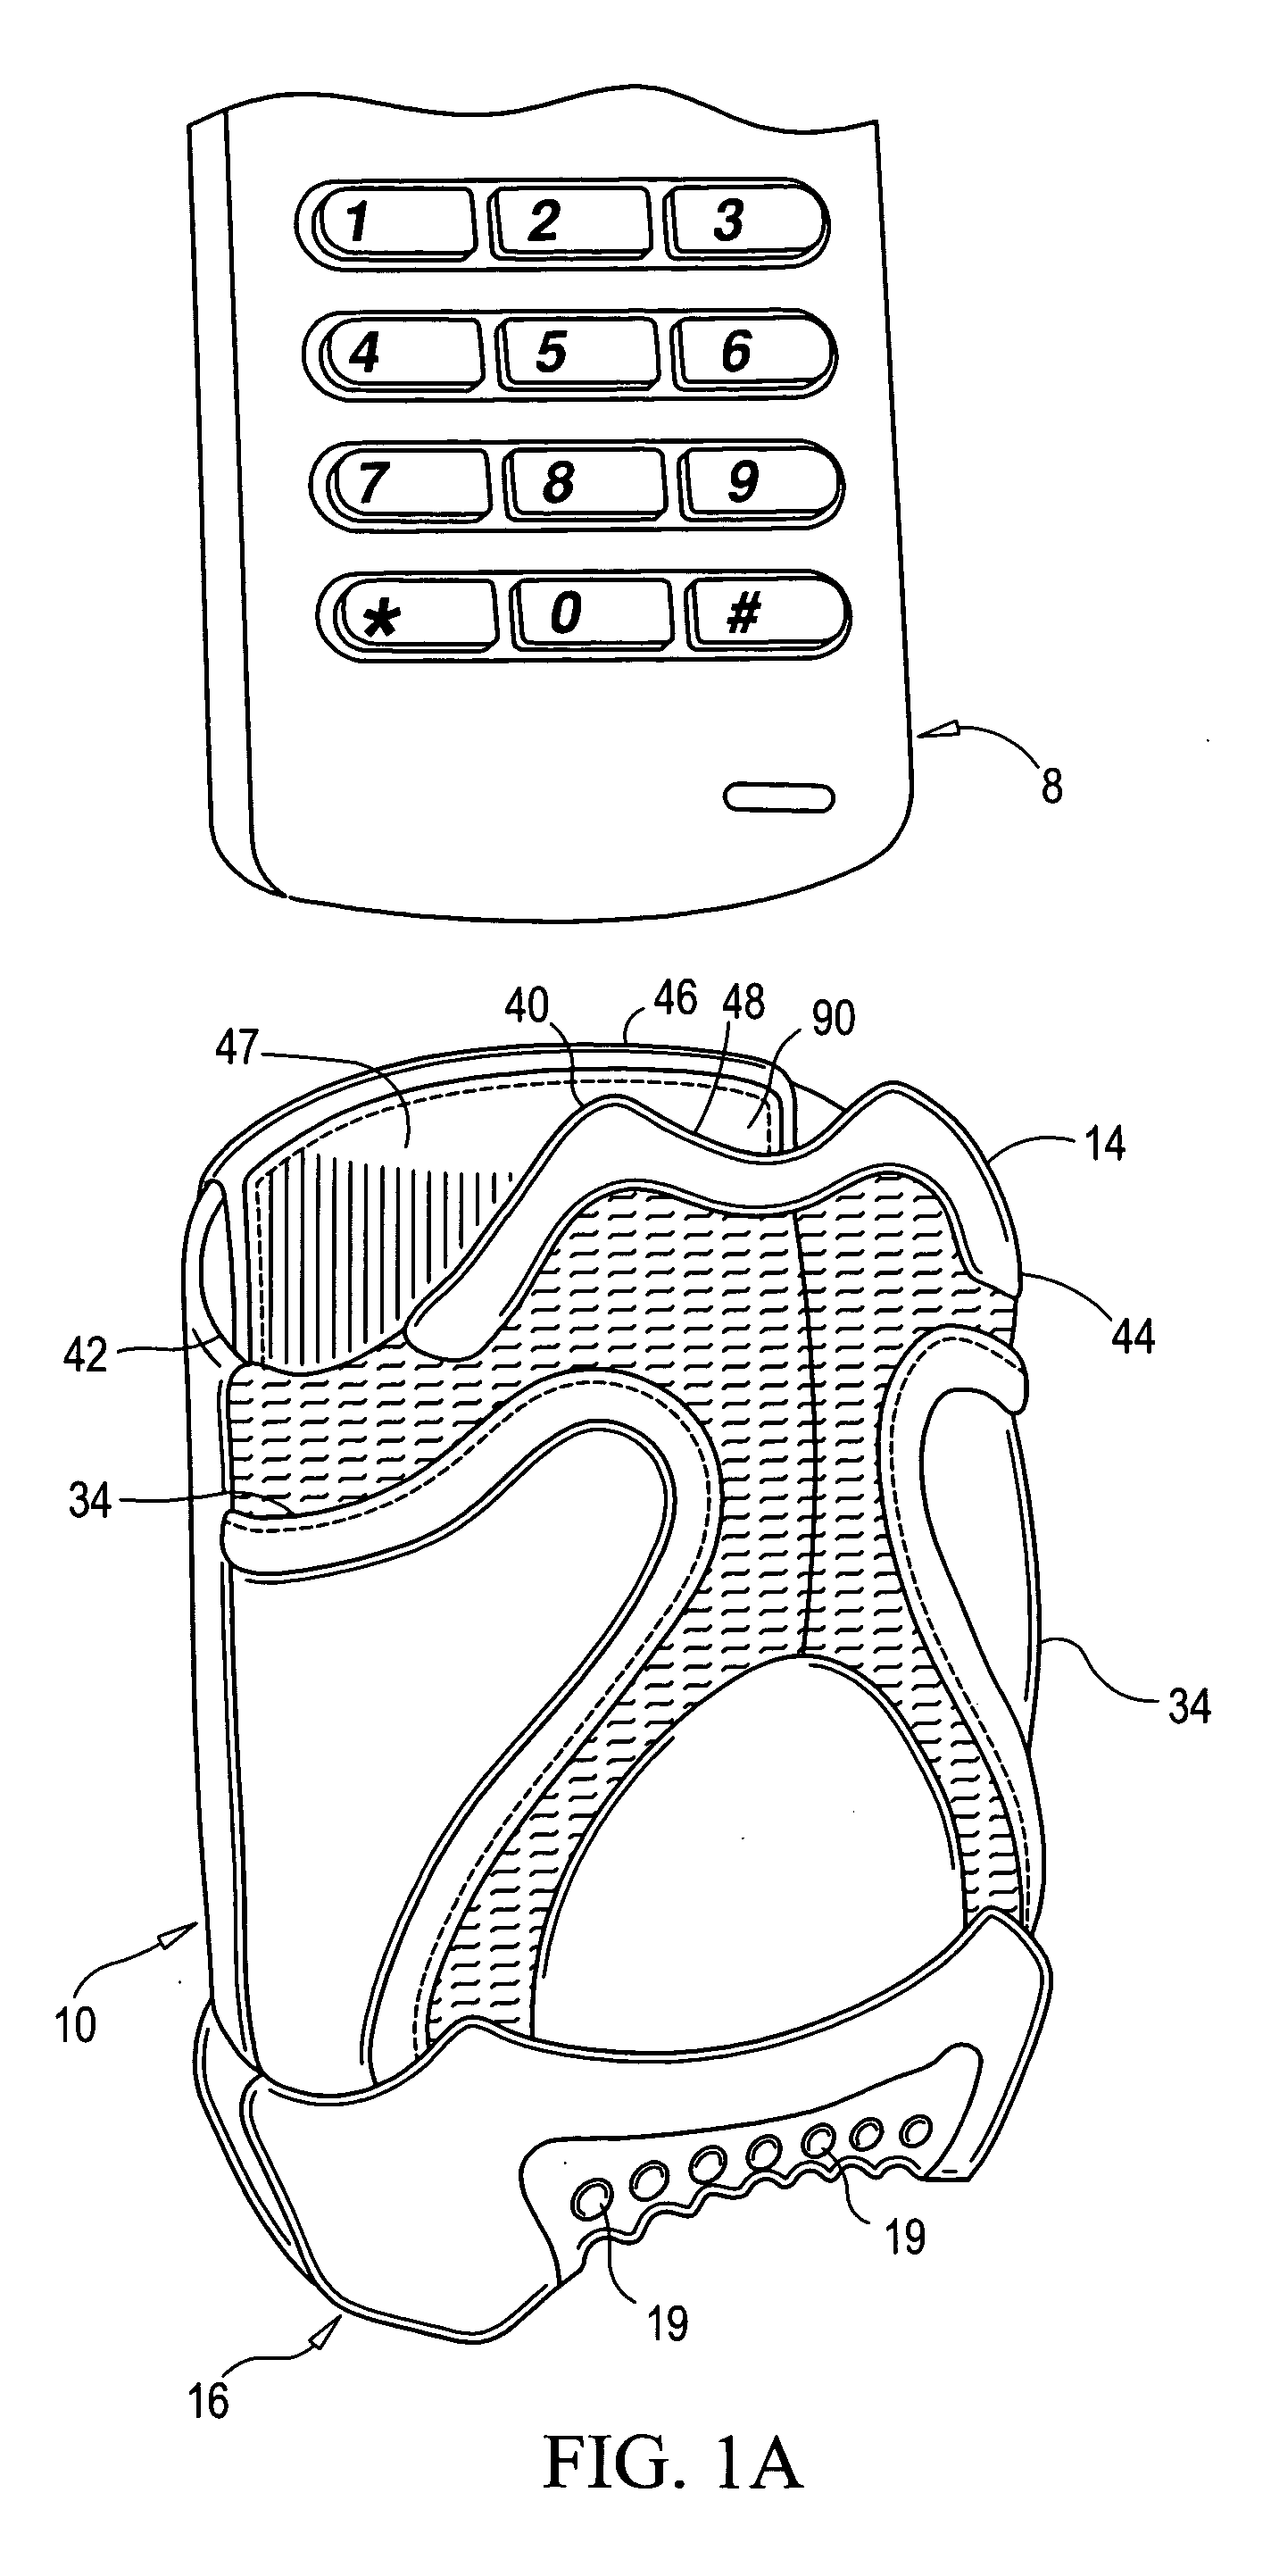 Carrying case for cell phone or other device with protective end cap and cushioning